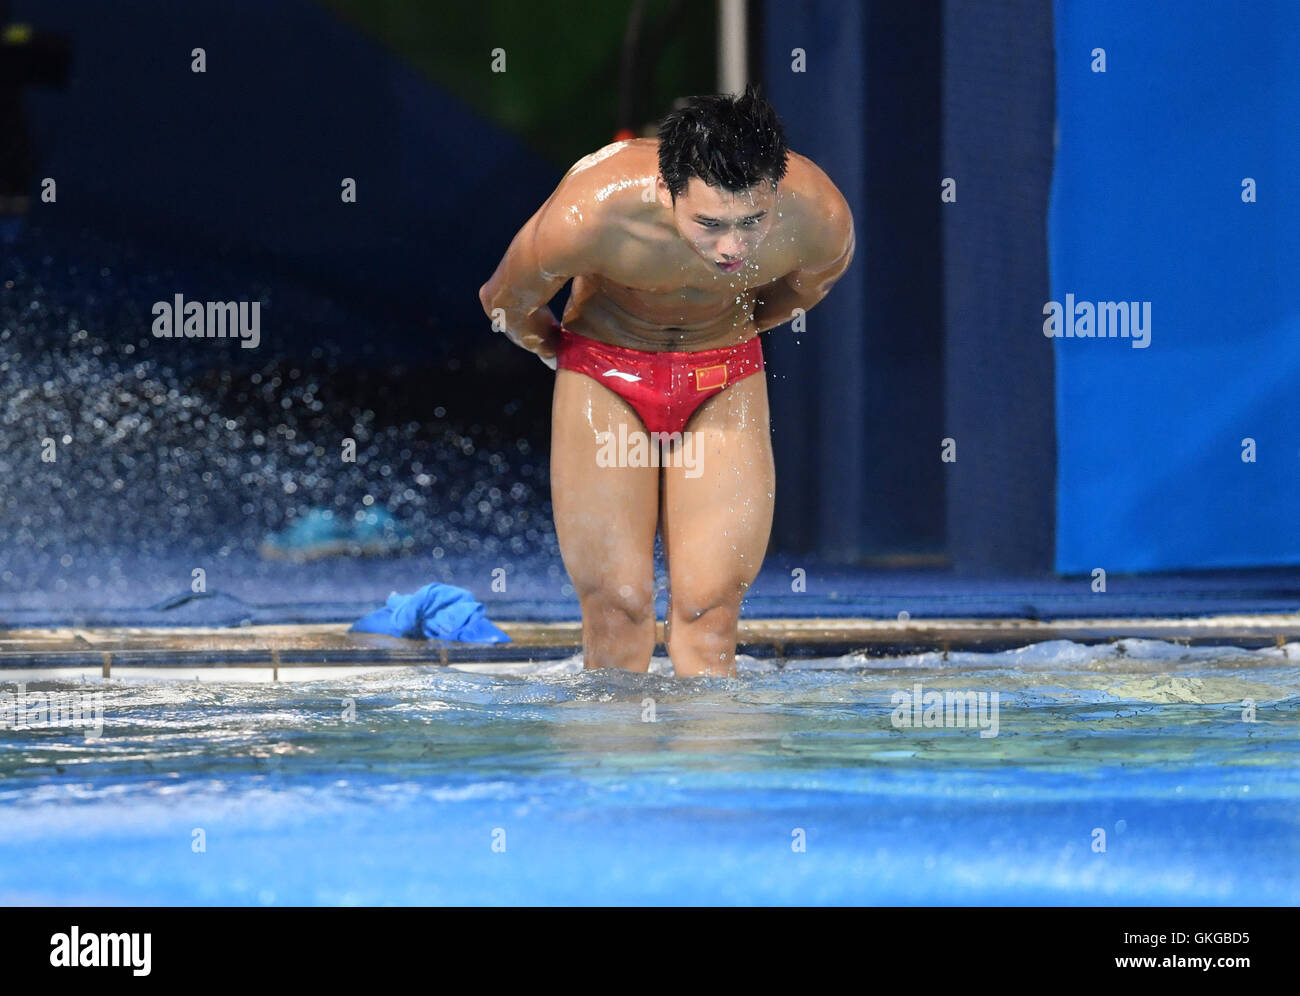 Rio de Janeiro, Brazil. 20th Aug, 2016. Gold medalist Chen Aisen of China reacts after his dive during the Men's 10m Platform Final of the Diving event during the Rio 2016 Olympic Games at the Maria Lenk Aquatics Centre in Rio de Janeiro, Brazil, 20 August 2016. Photo: Felix Kaestle/dpa/Alamy Live News Stock Photo